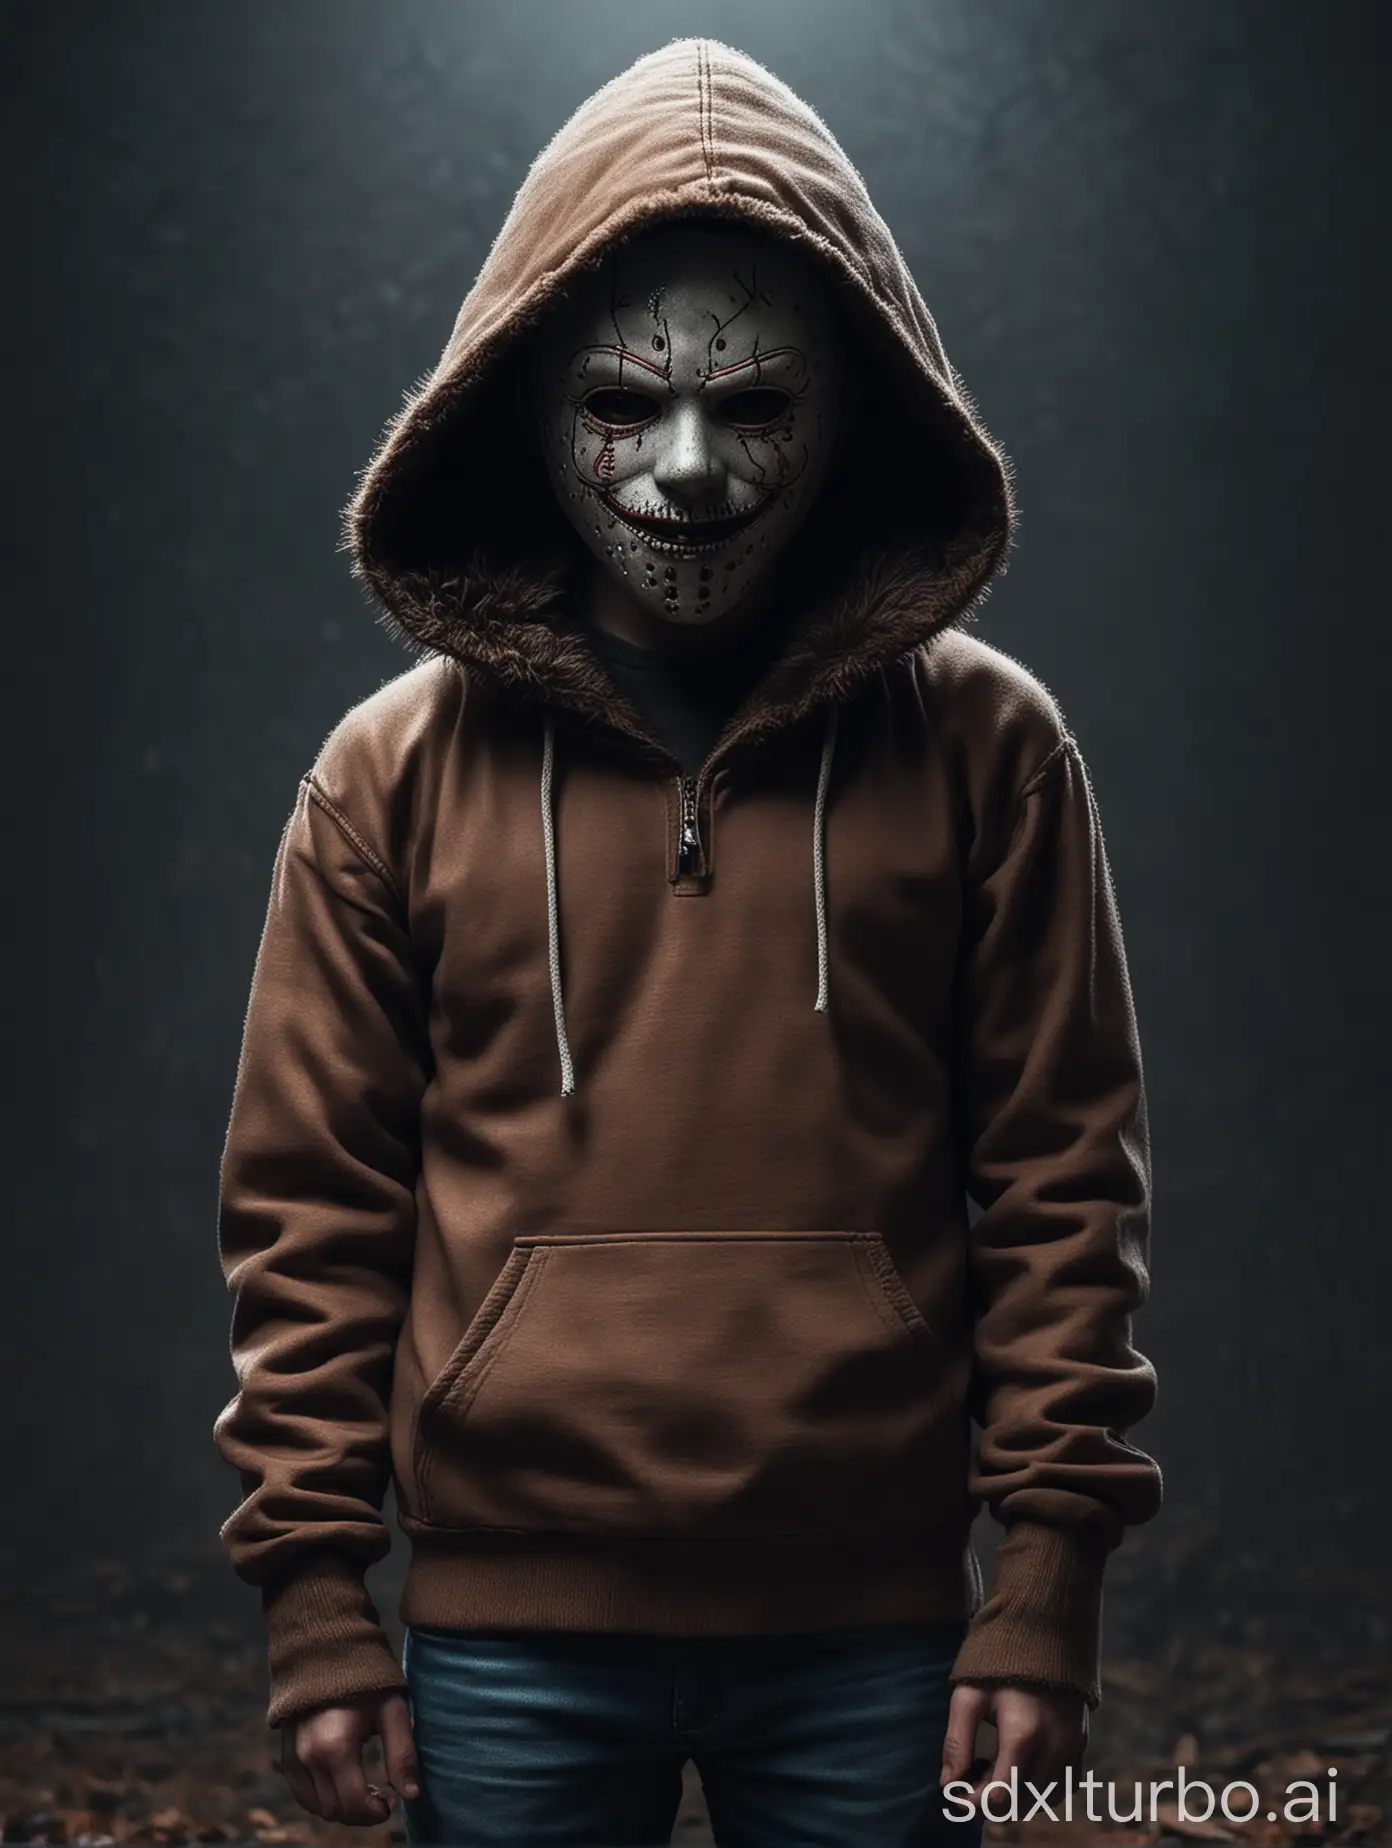 eleven, fur-lined hoodie, stranger things, full body, ultra HD detailed, professional photography, assassin-snood-mouth-mask, horror. Caption in in hollow-bold style: "Hell is also just another Kingdom" below: "By Byakuran"
